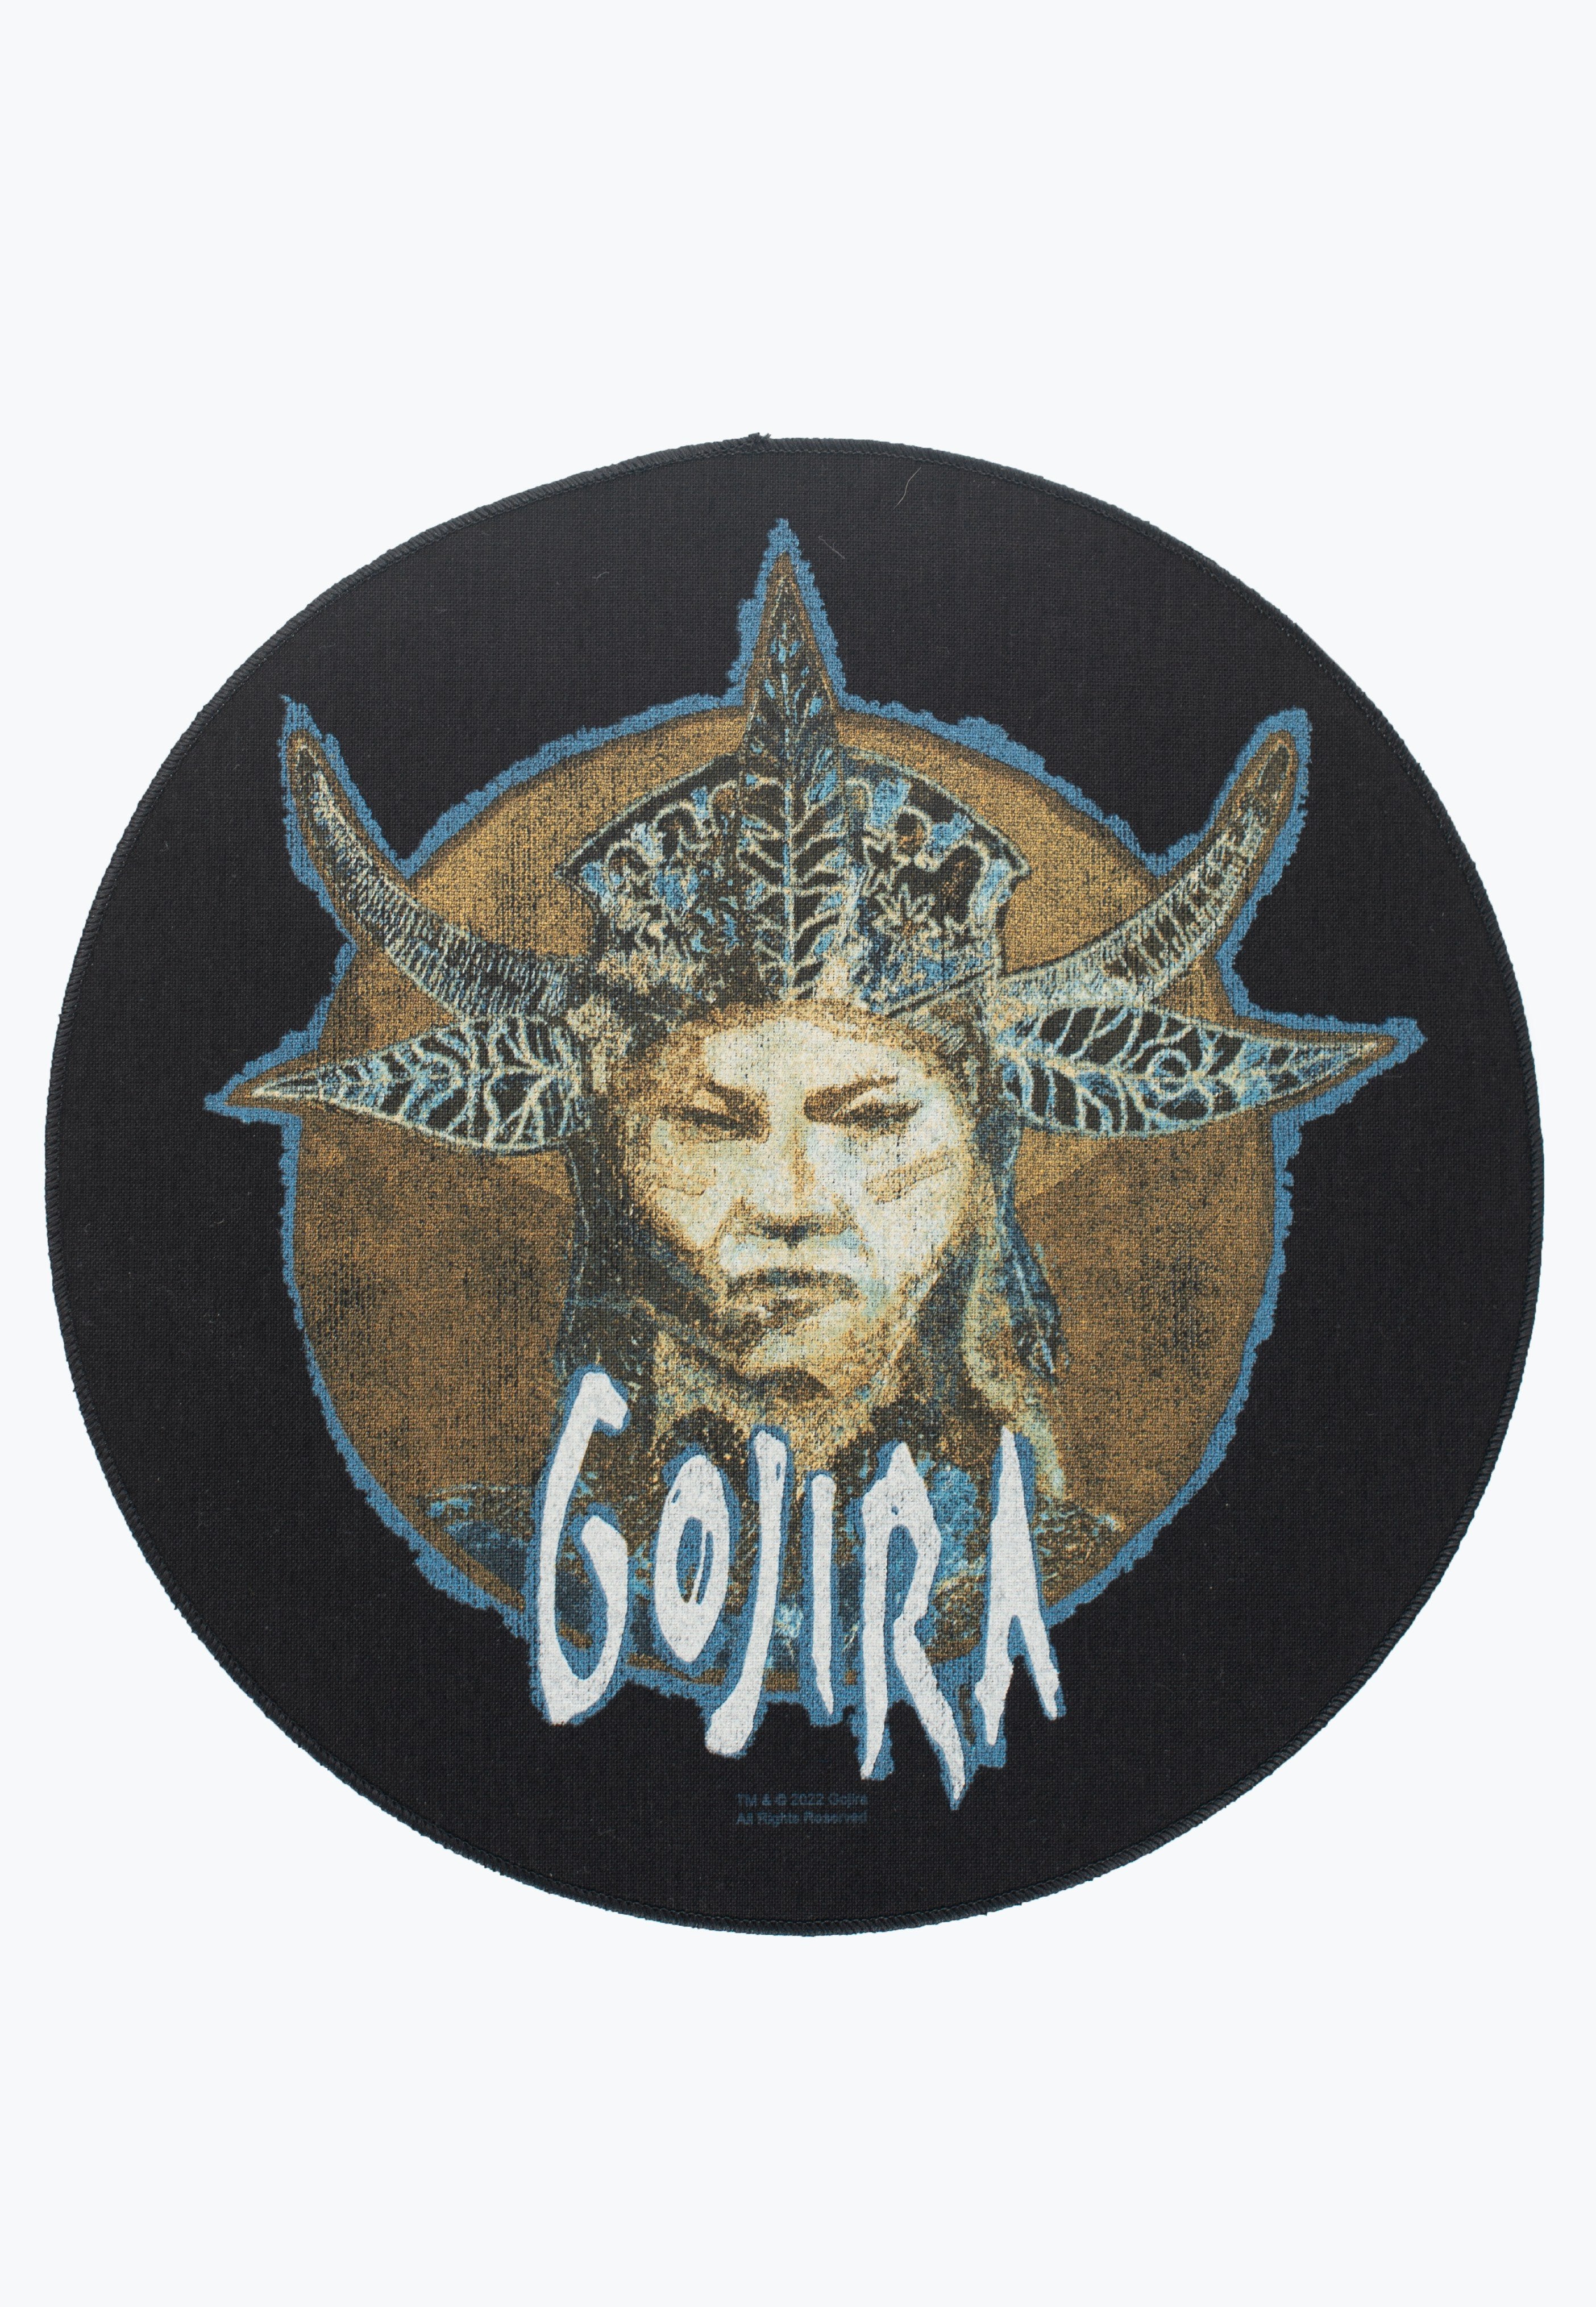 Gojira - Fortitude - Backpatch